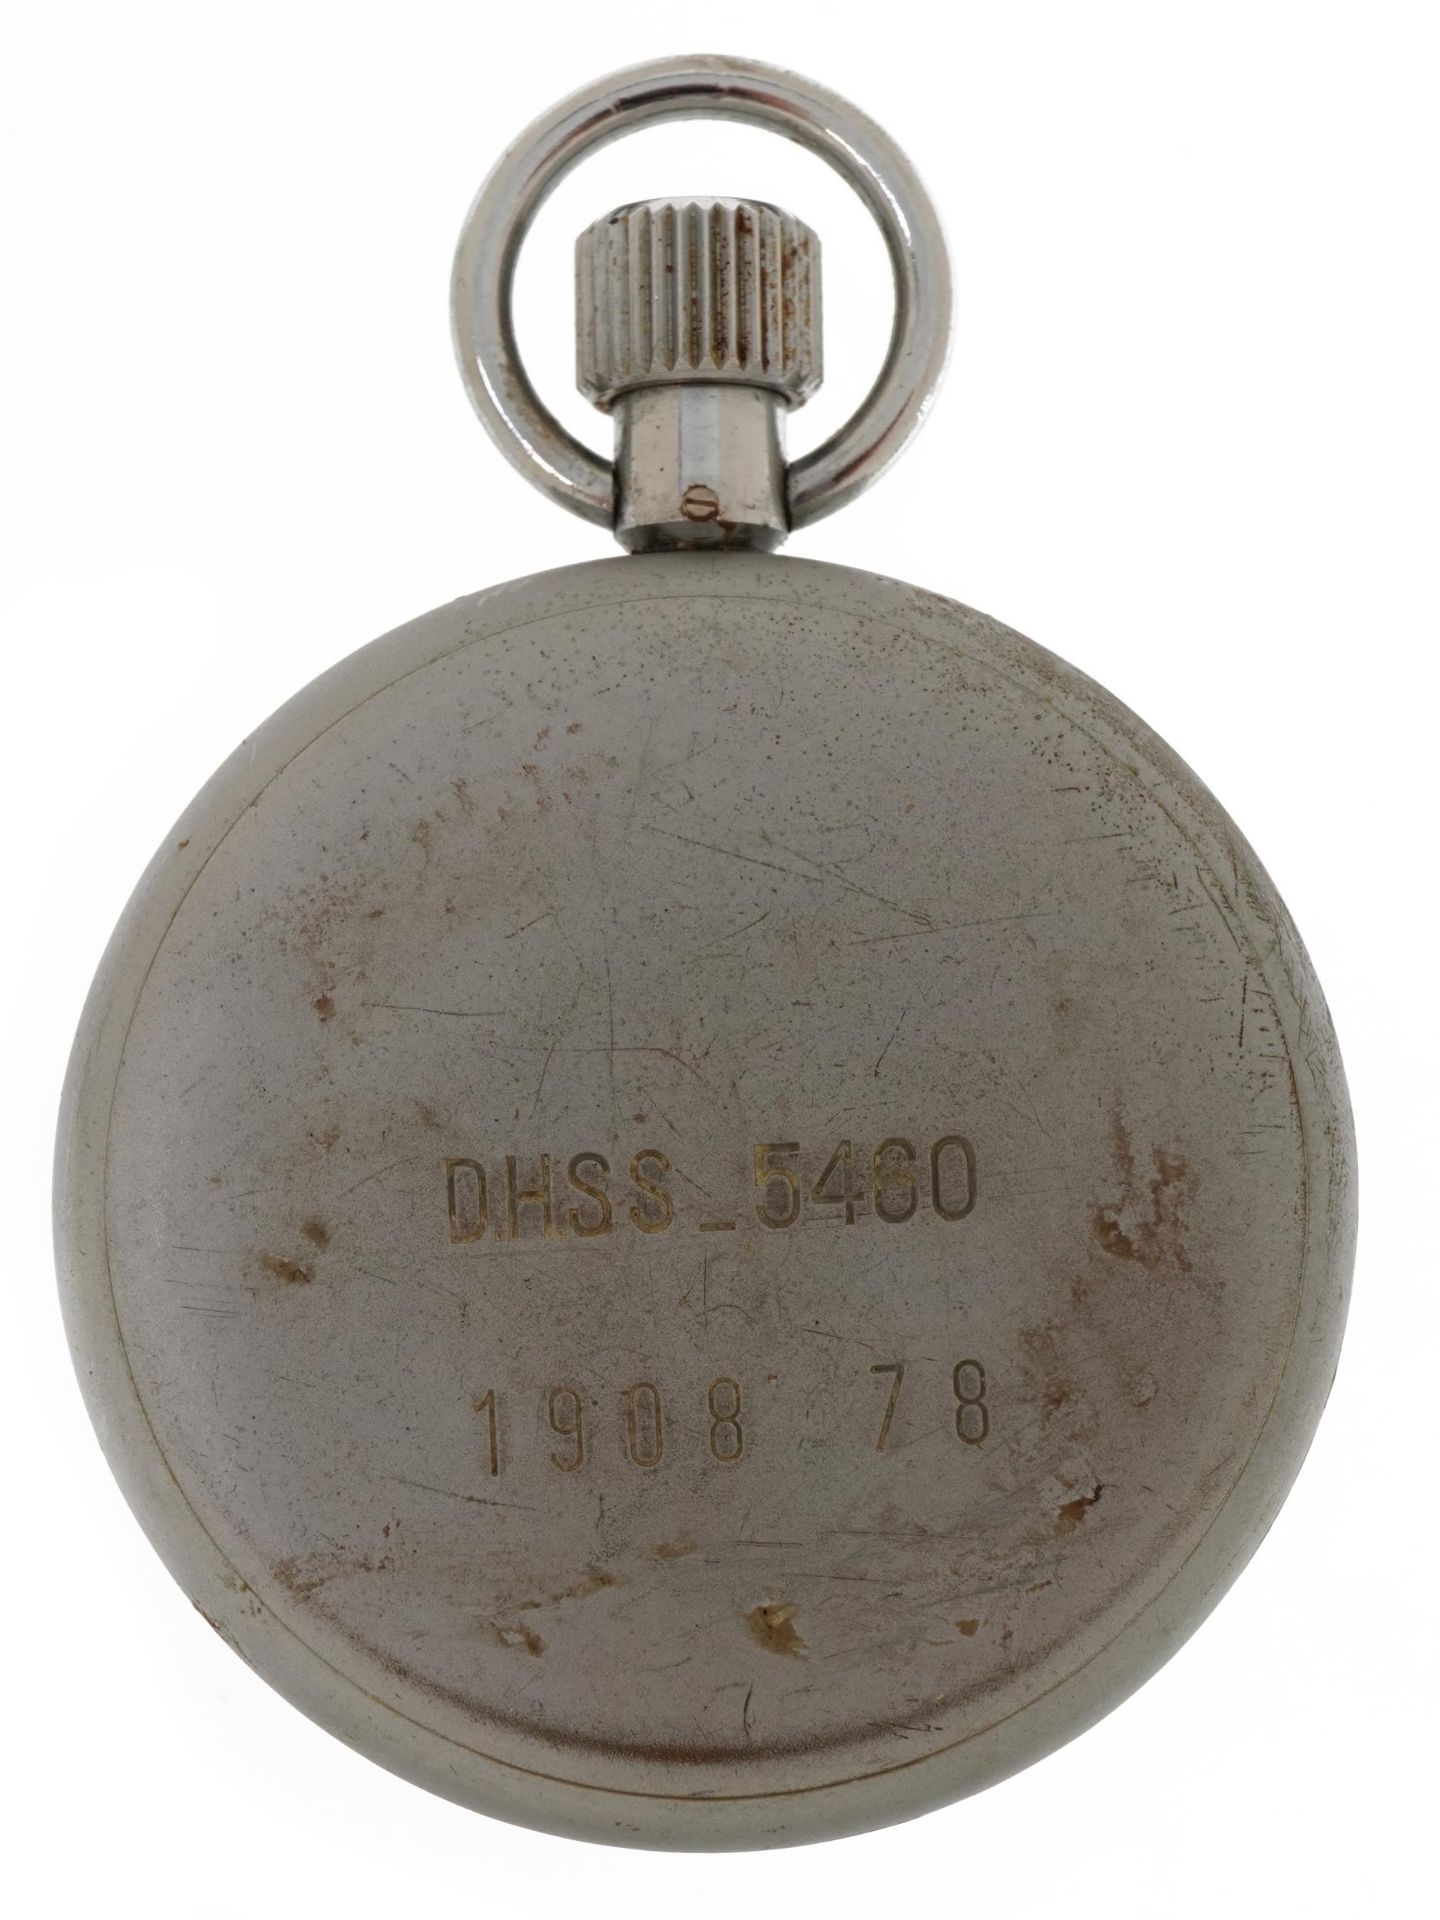 CWC, military interest open face stop watch, the case engraved D H S S _5460 1908 78, 50.5mm in - Image 2 of 3